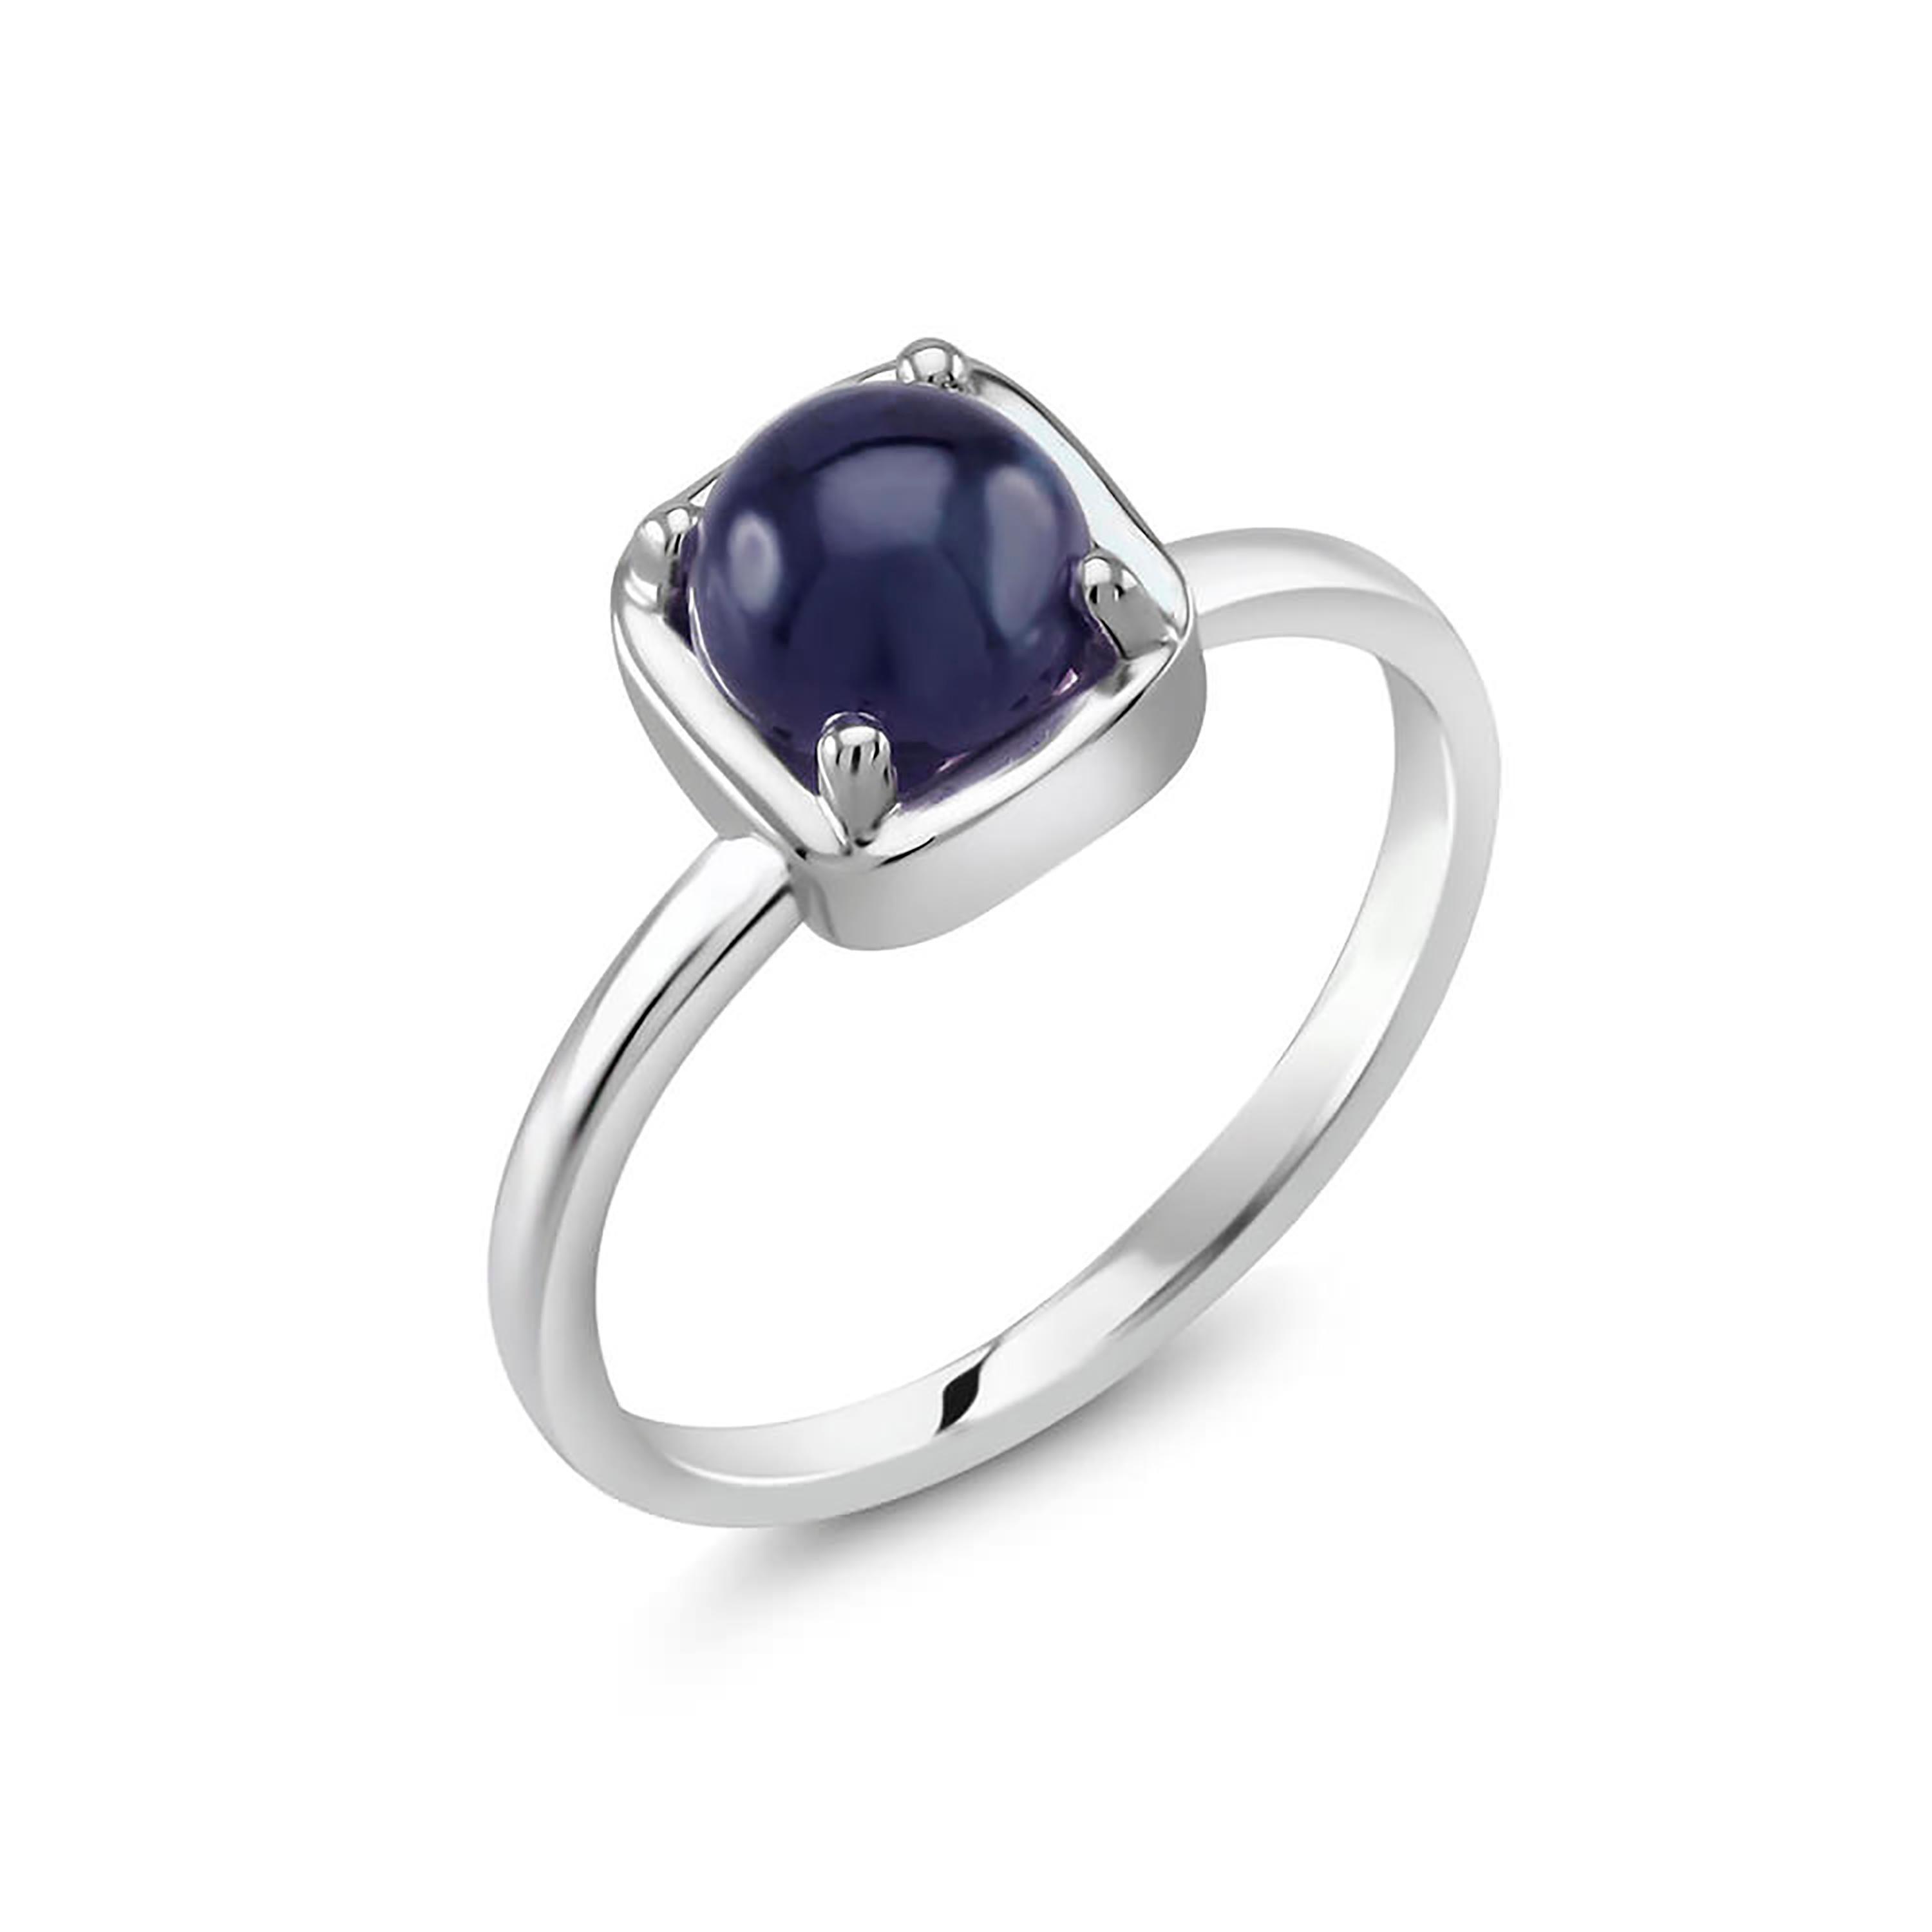 Contemporary Cabochon Sapphire Solitaire Sterling Silver Ring White Gold Plate